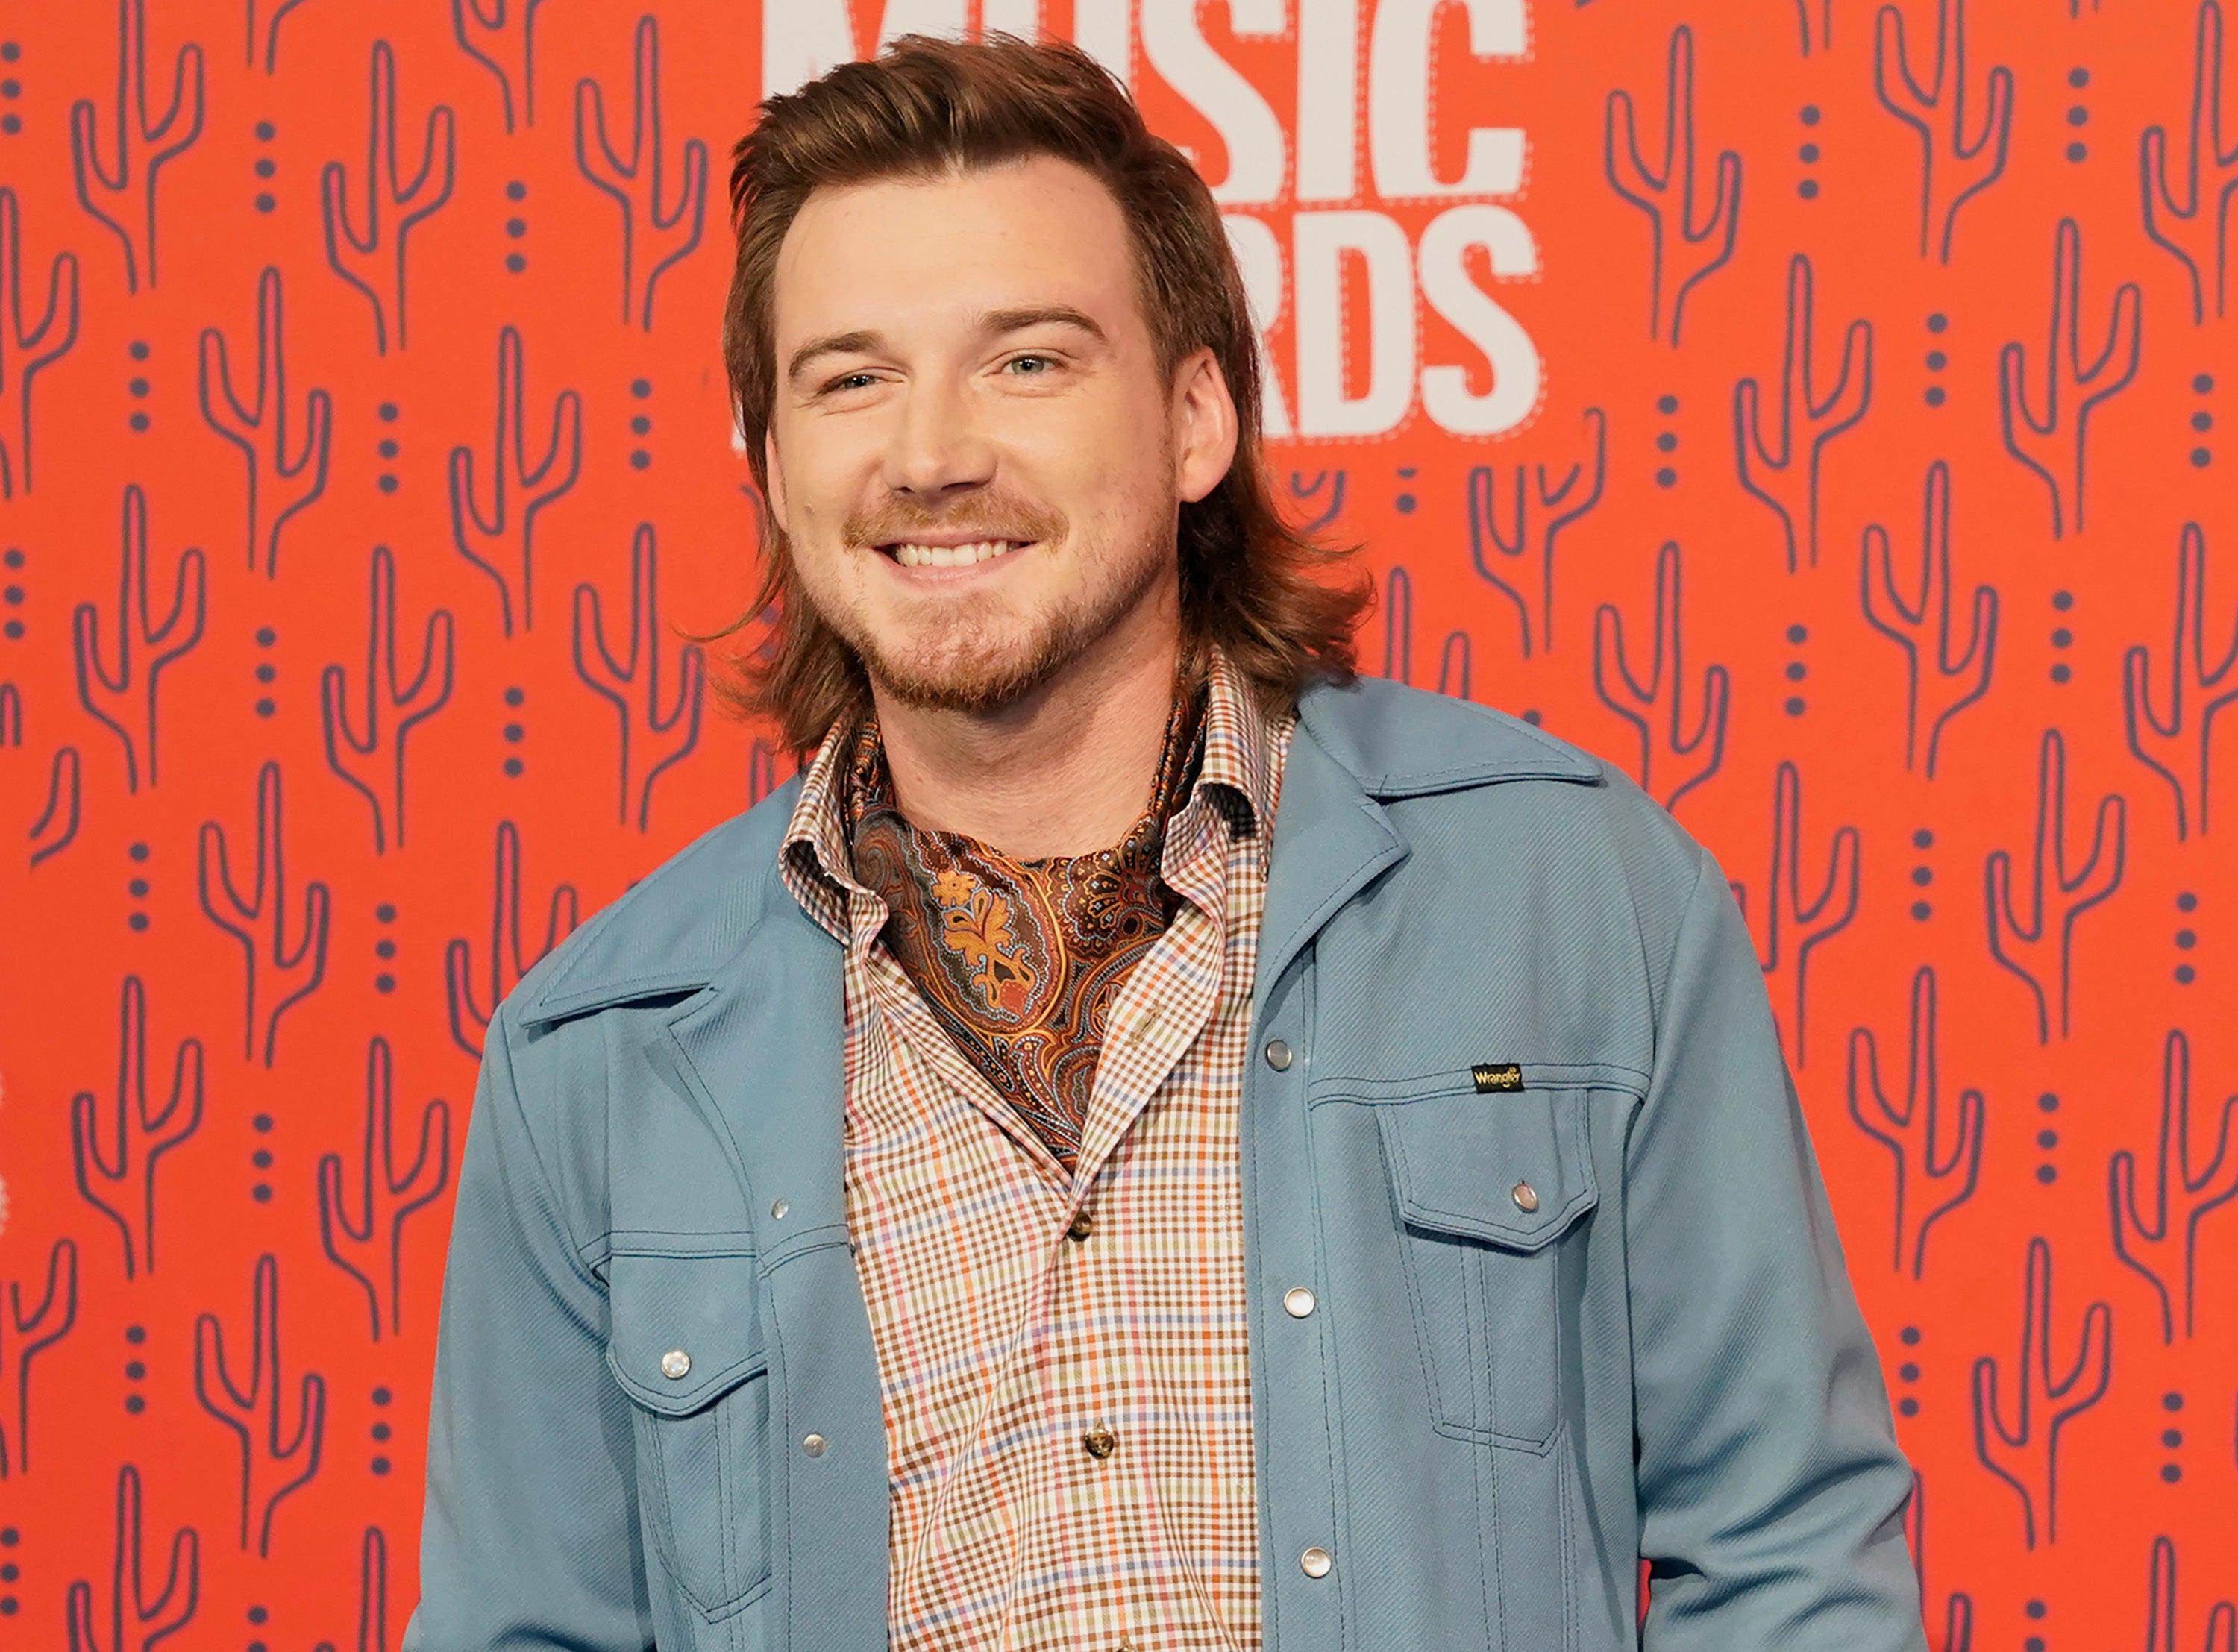 In 2022, Morgan Wallen was captured on camera drunkenly shouting the N-word at his friends outside his home in Tennessee